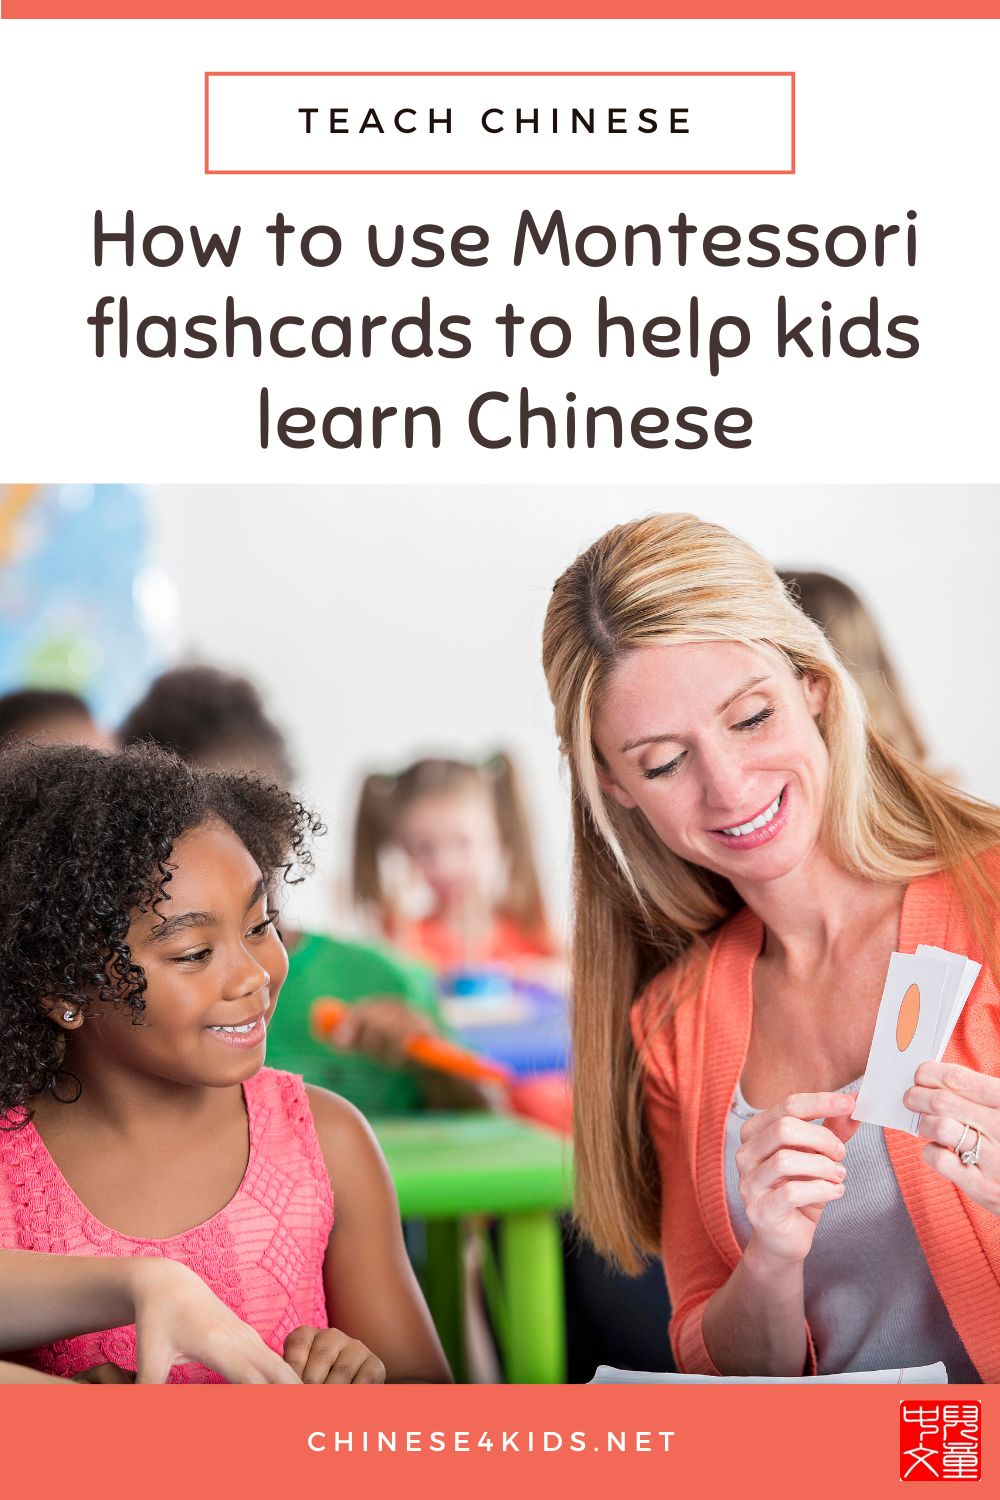 Discover how to use Montessori flashcards to effectively teach Mandarin Chinese to kids with visual aids, games, and interactive activities.